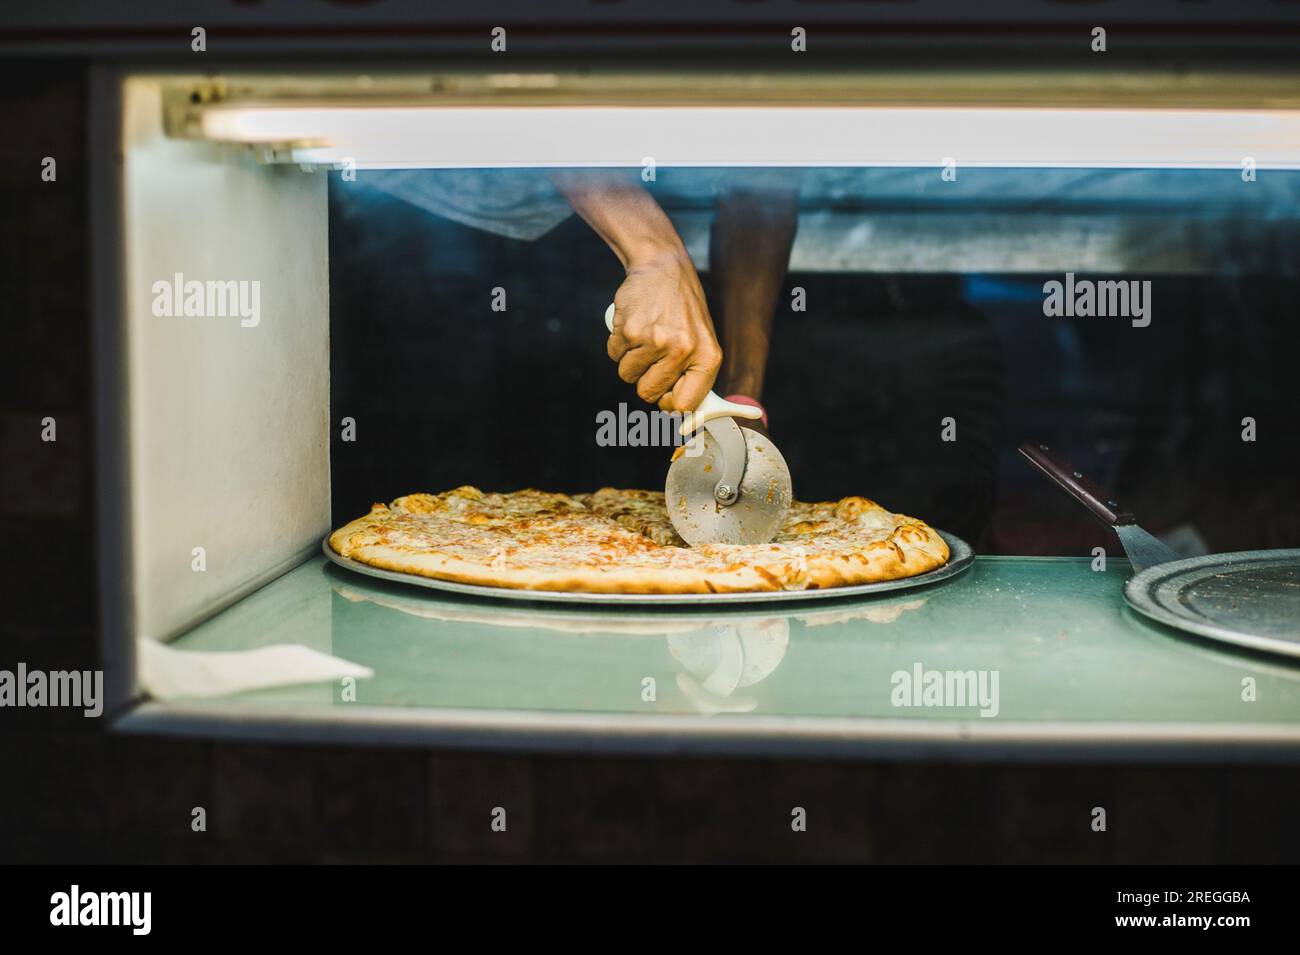 Multicultural hand slices pizza in a NYC 99 cent pizza shop Stock Photo